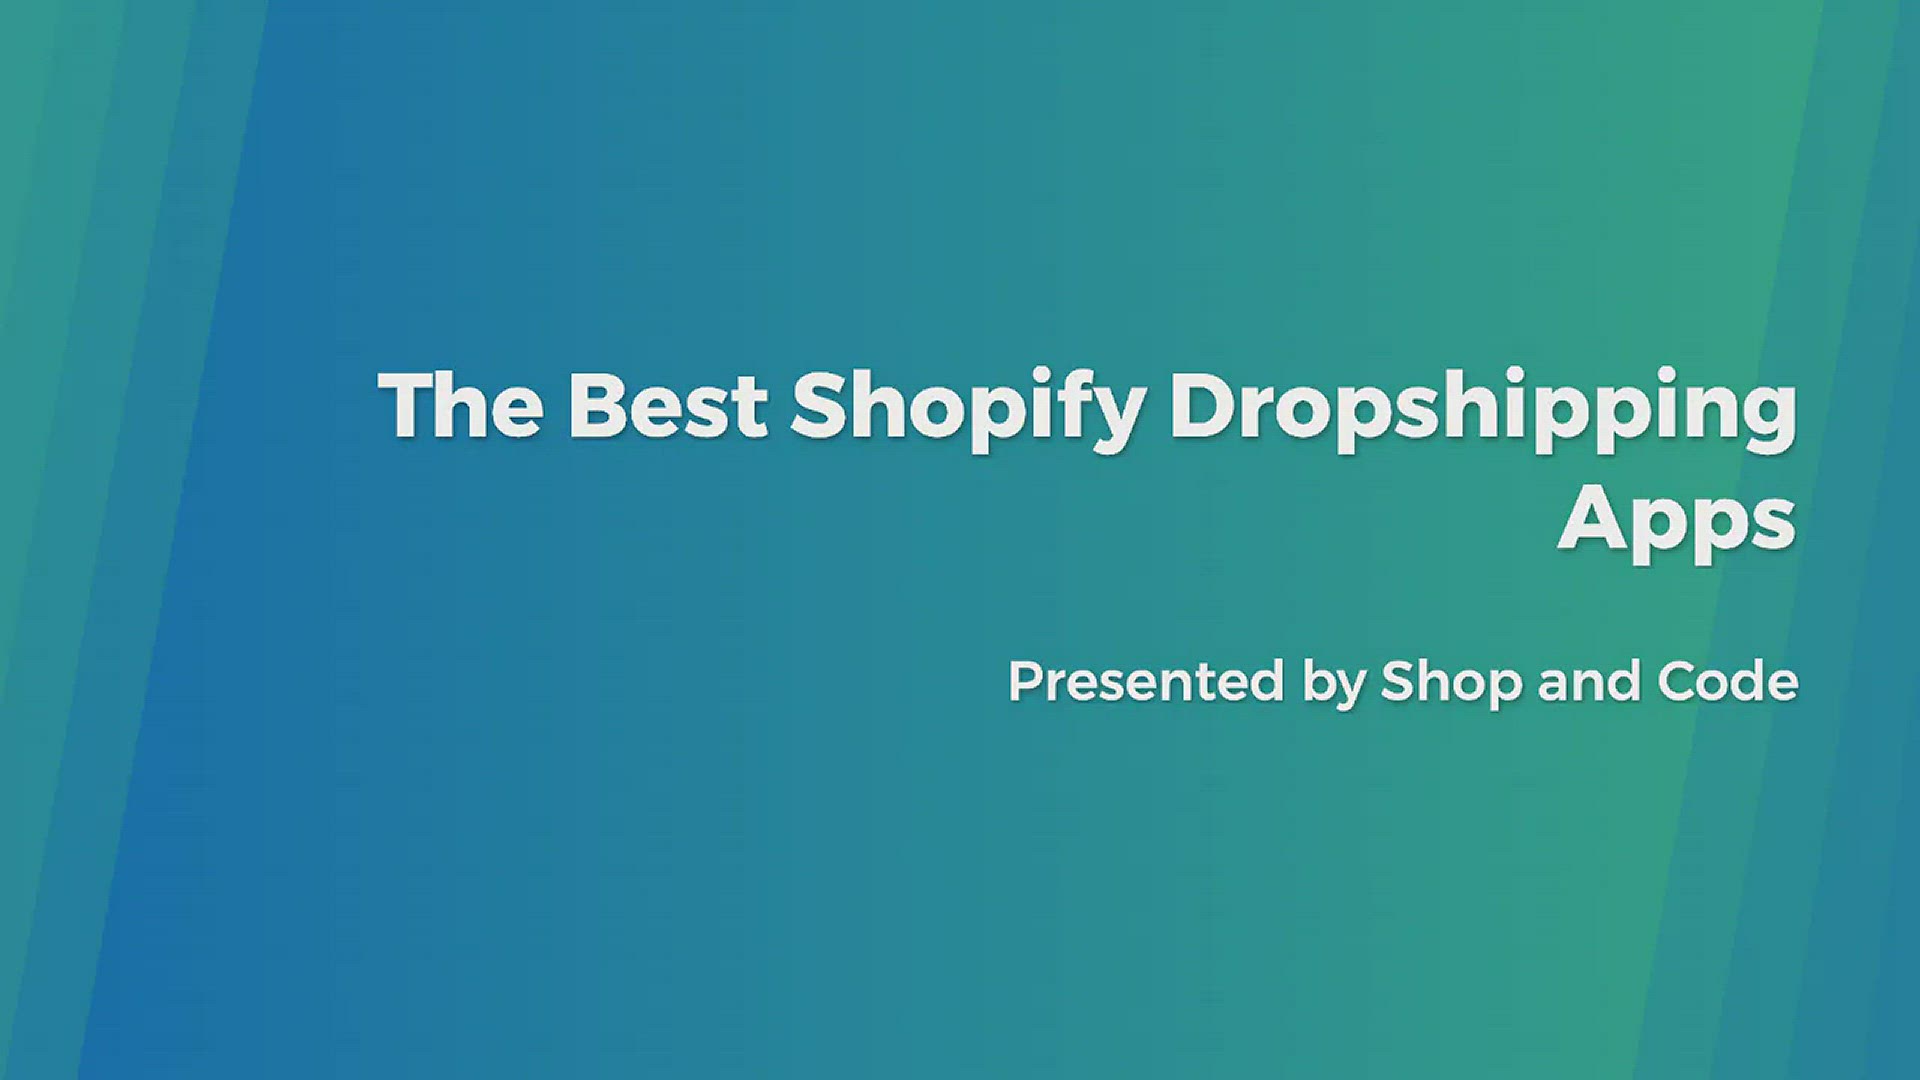 'Video thumbnail for The Best Shopify Dropshipping Apps'